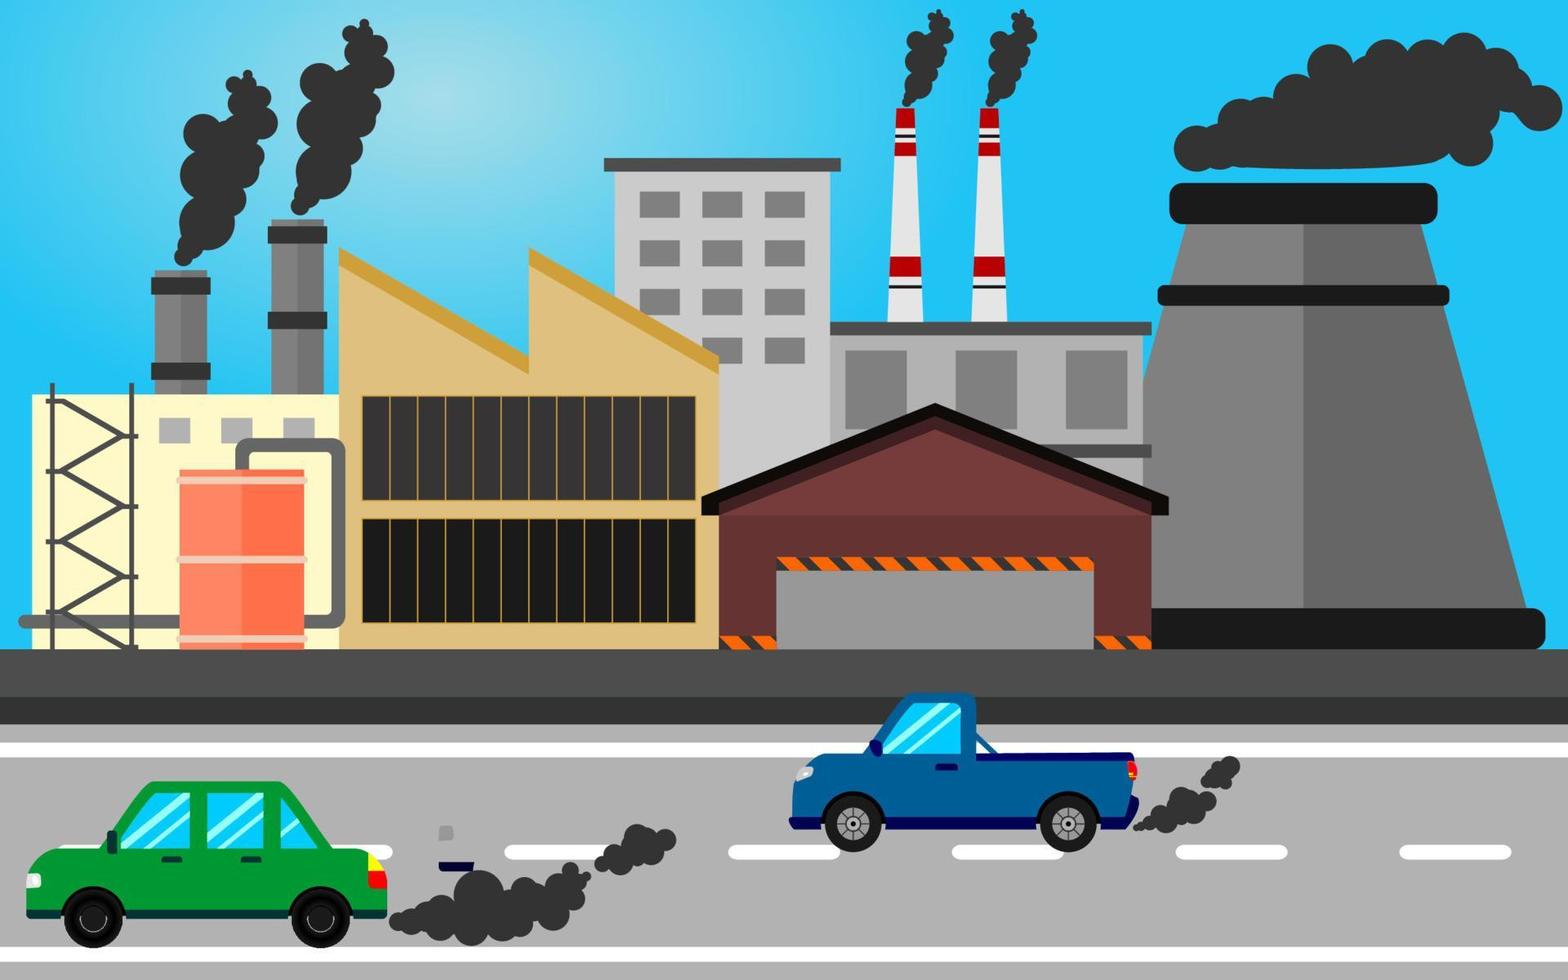 motor vehicle pollution and factories make global warming, vector illustration